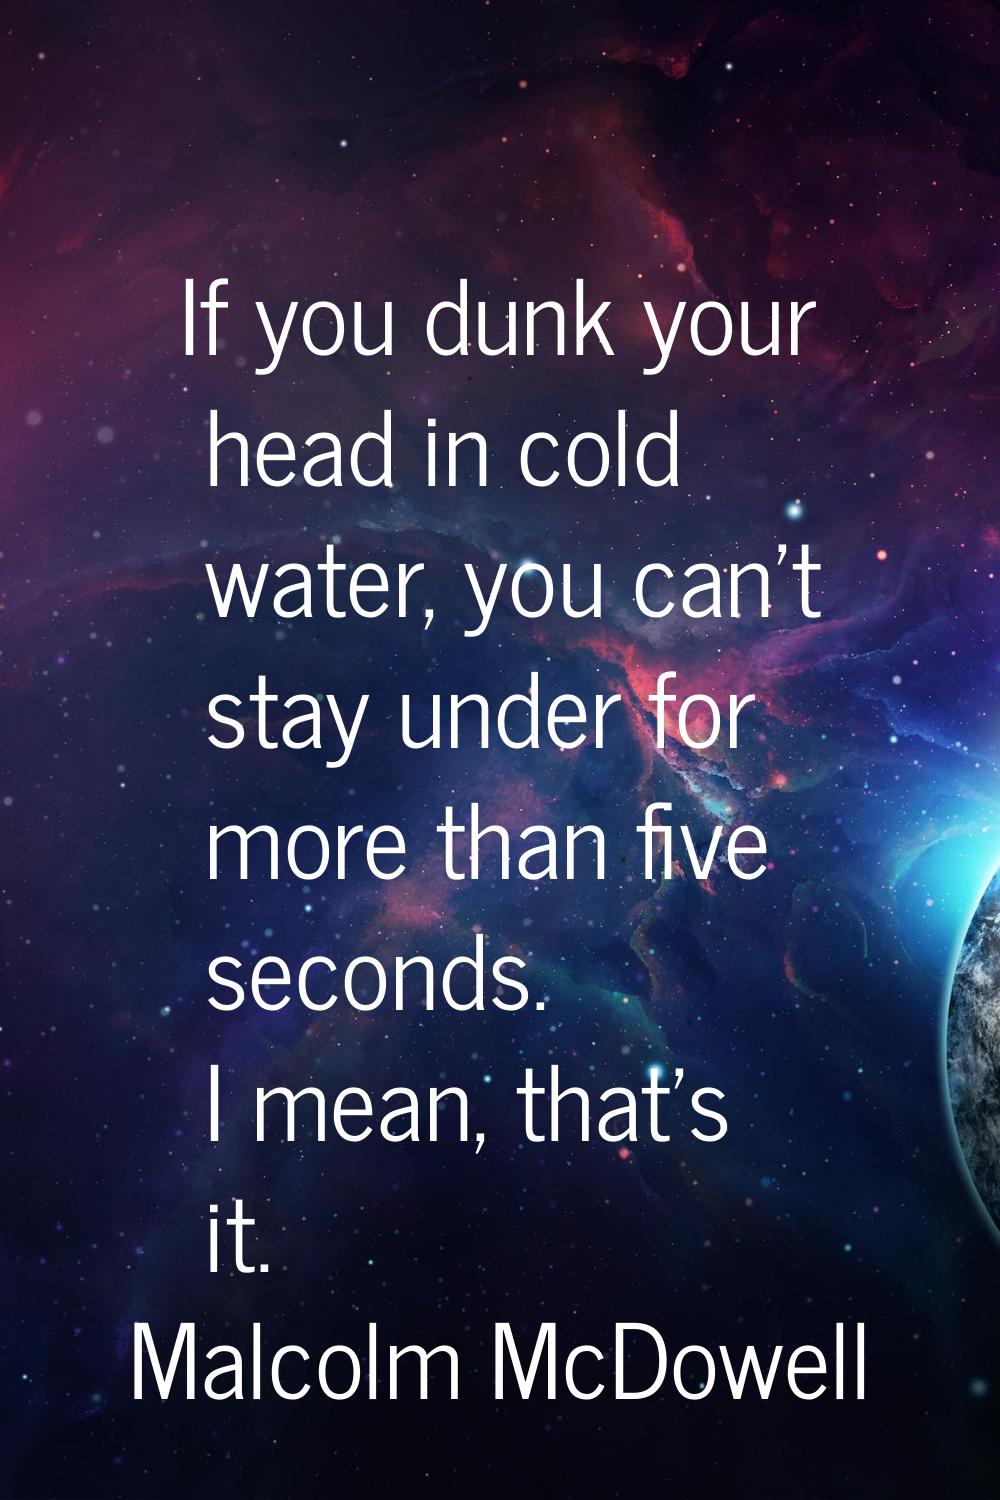 If you dunk your head in cold water, you can't stay under for more than five seconds. I mean, that'